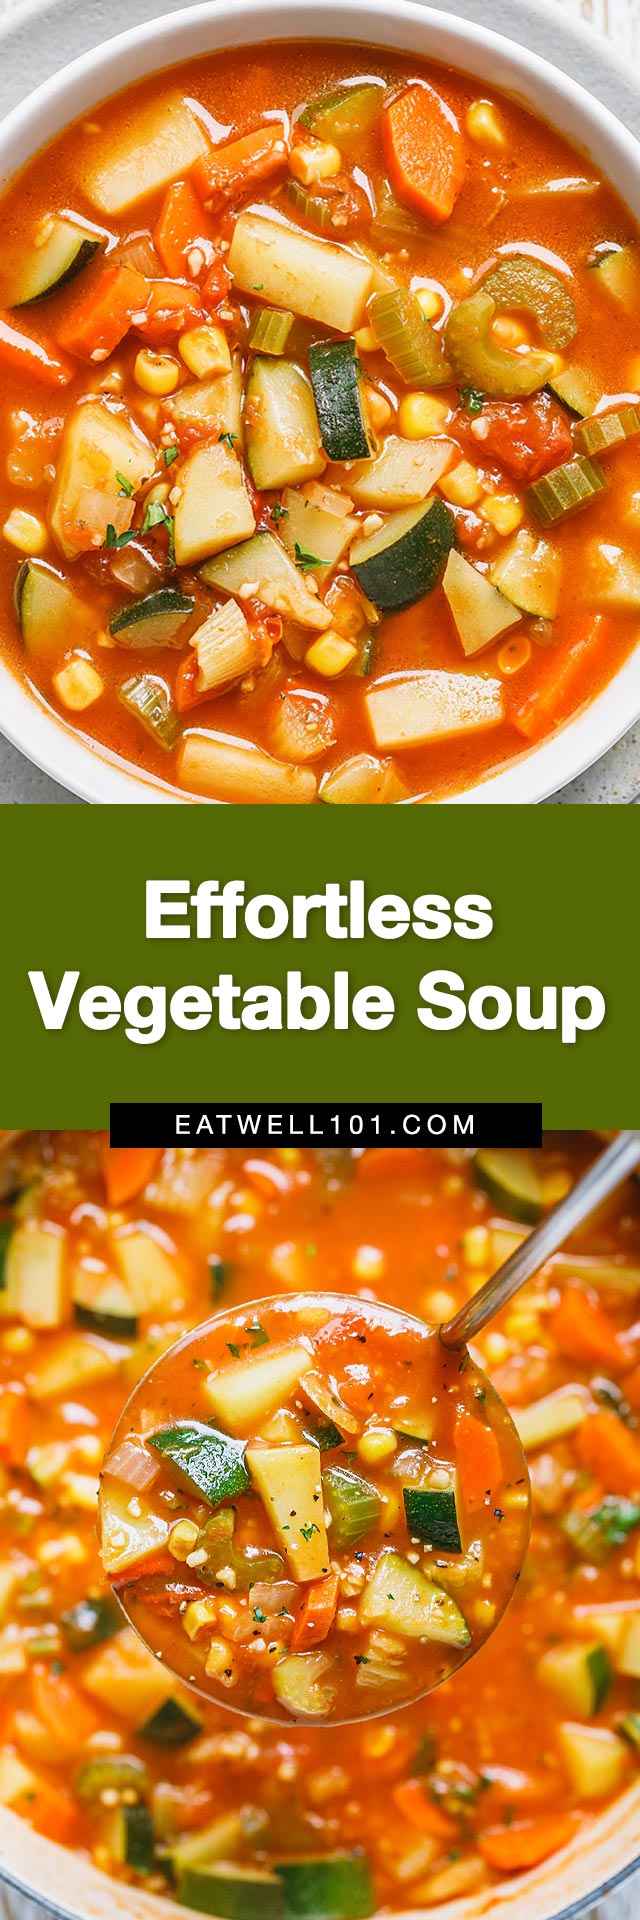 Easy Vegetable Soup - #vegetable #soup #recipe #eatwell101 - Make this easy vegetable soup recipe full of nourishing veggies you have on hand! Nourishing and light, it's perfect for warming up on cold nights.